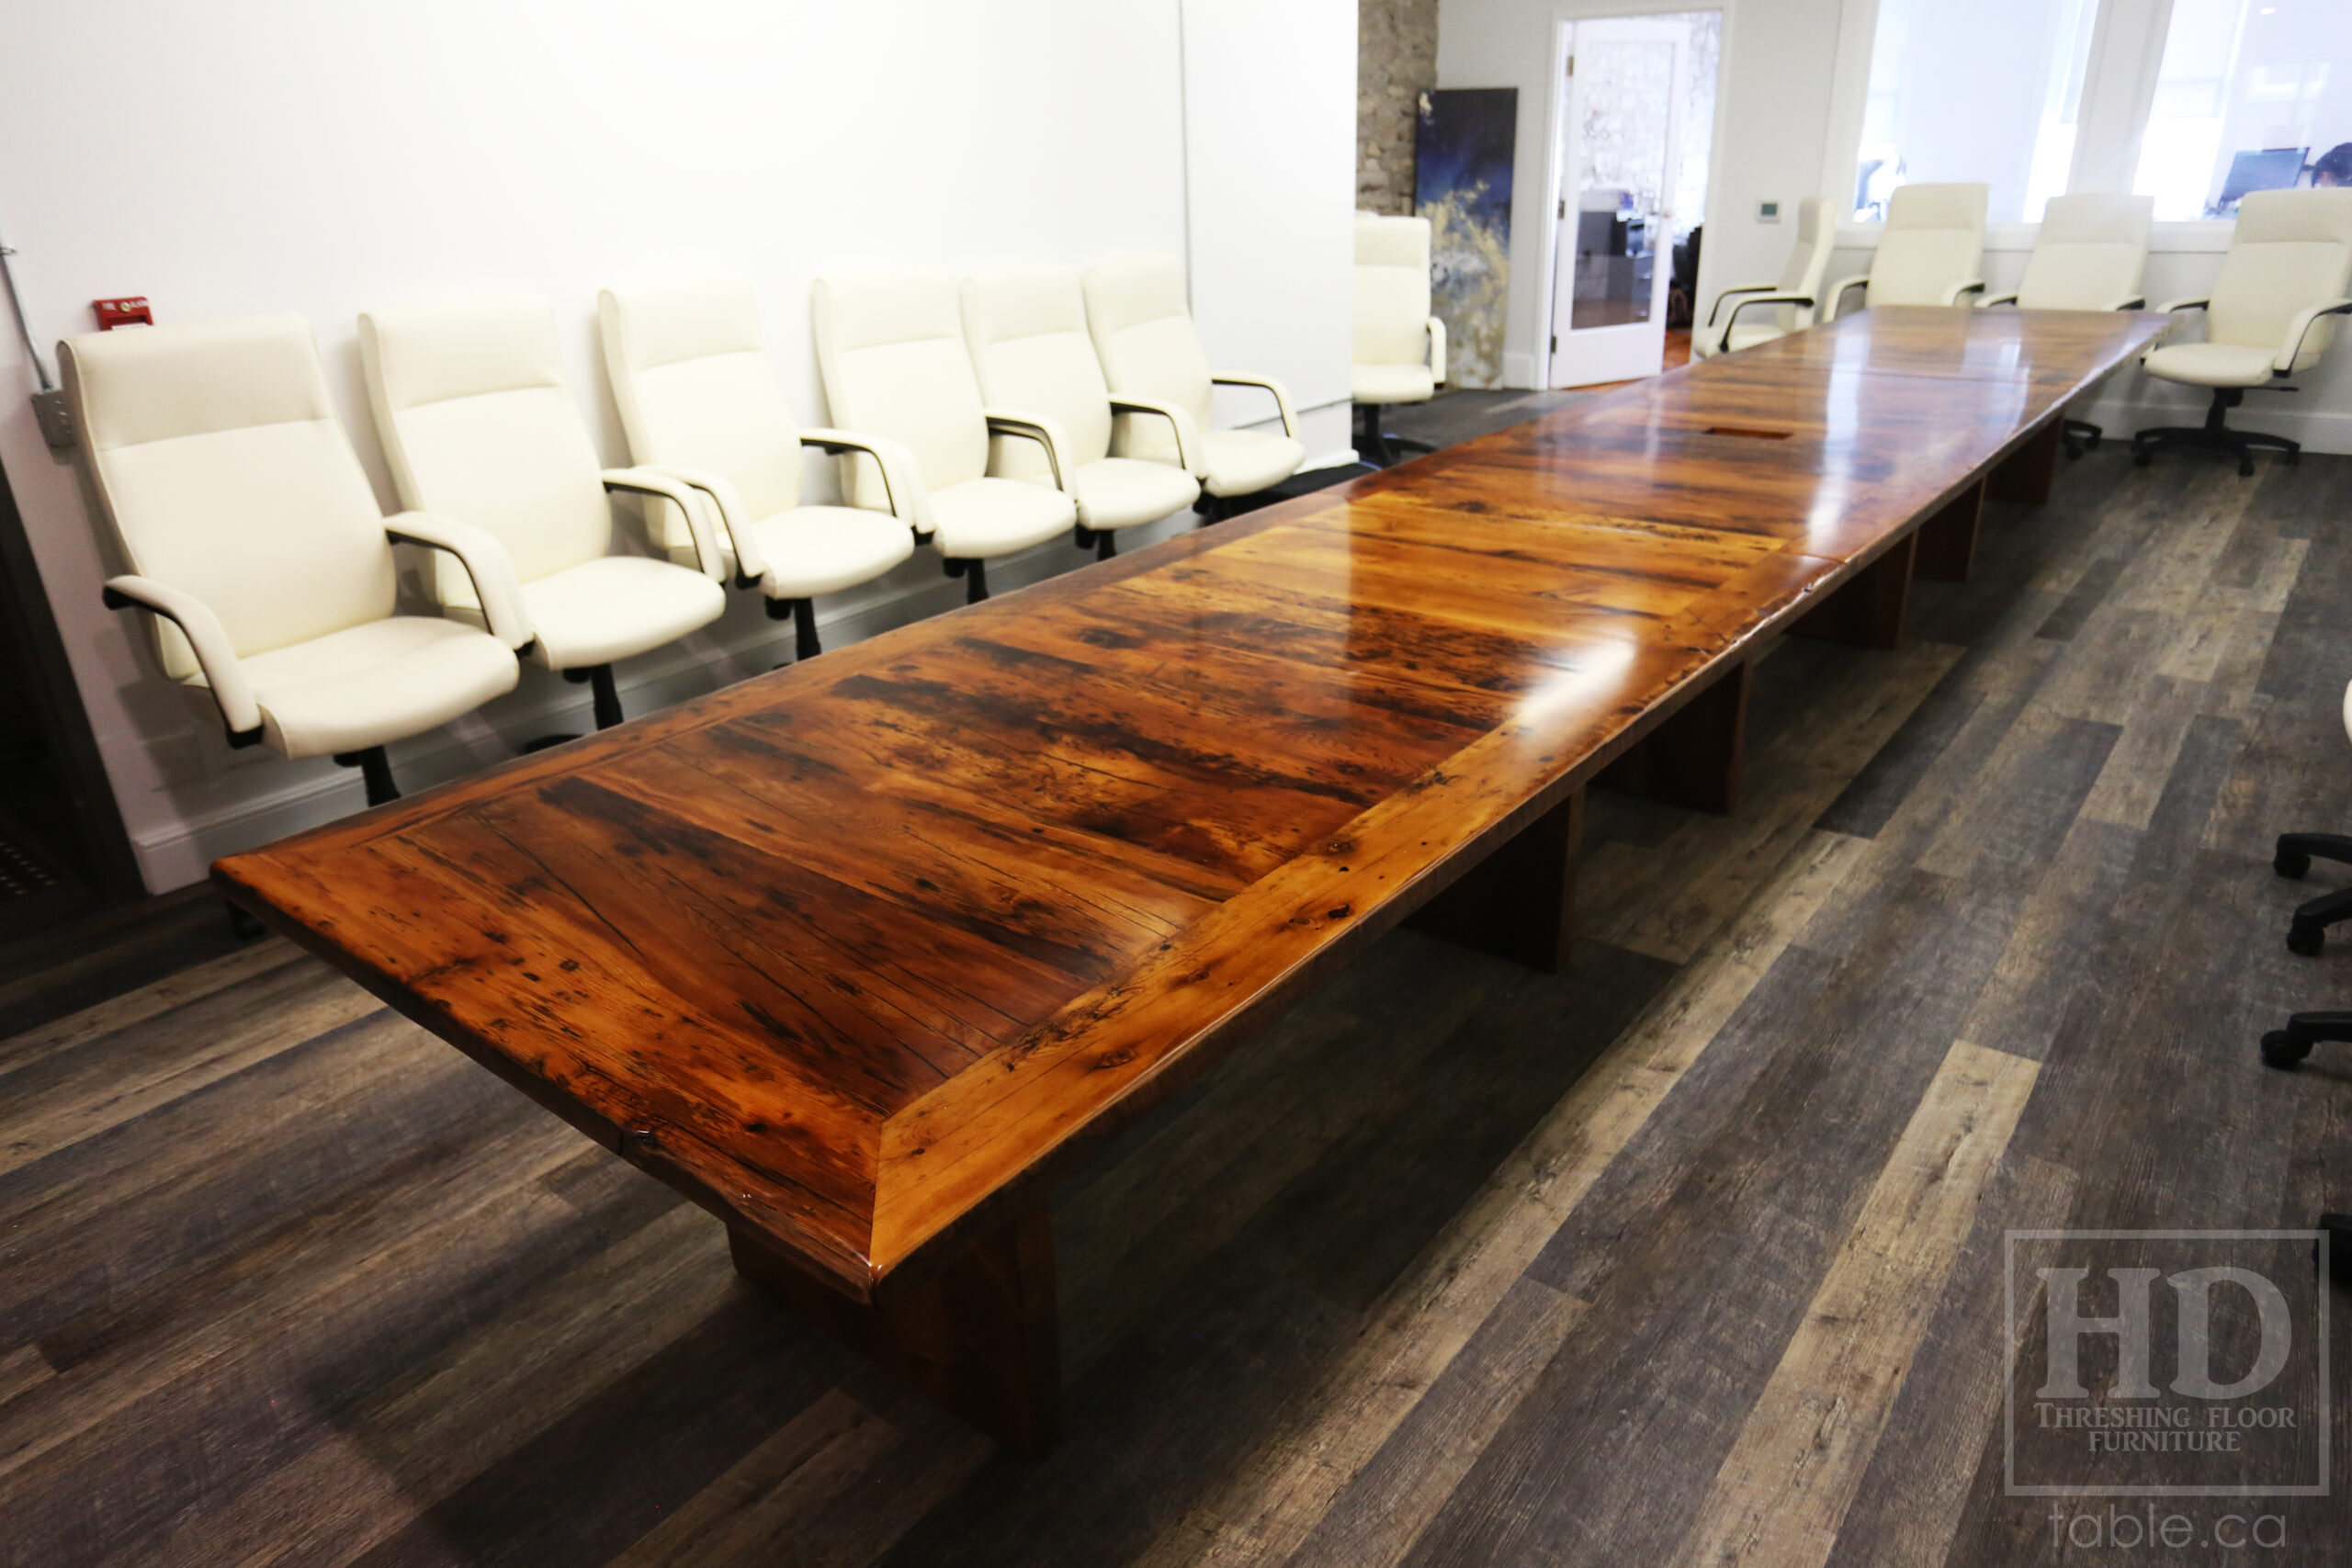 24 Ft Ontario Barnwood Table we made for a Guelph, Ontario company - 48" wide – [3] 8' Sections [on site final doweling] - 3" Joist Plank Posts Base - Reclaimed Hemlock Threshing Floor 2” Top - Original edges & distressing maintained - Premium epoxy + satin polyurethane finish - www.table.ca